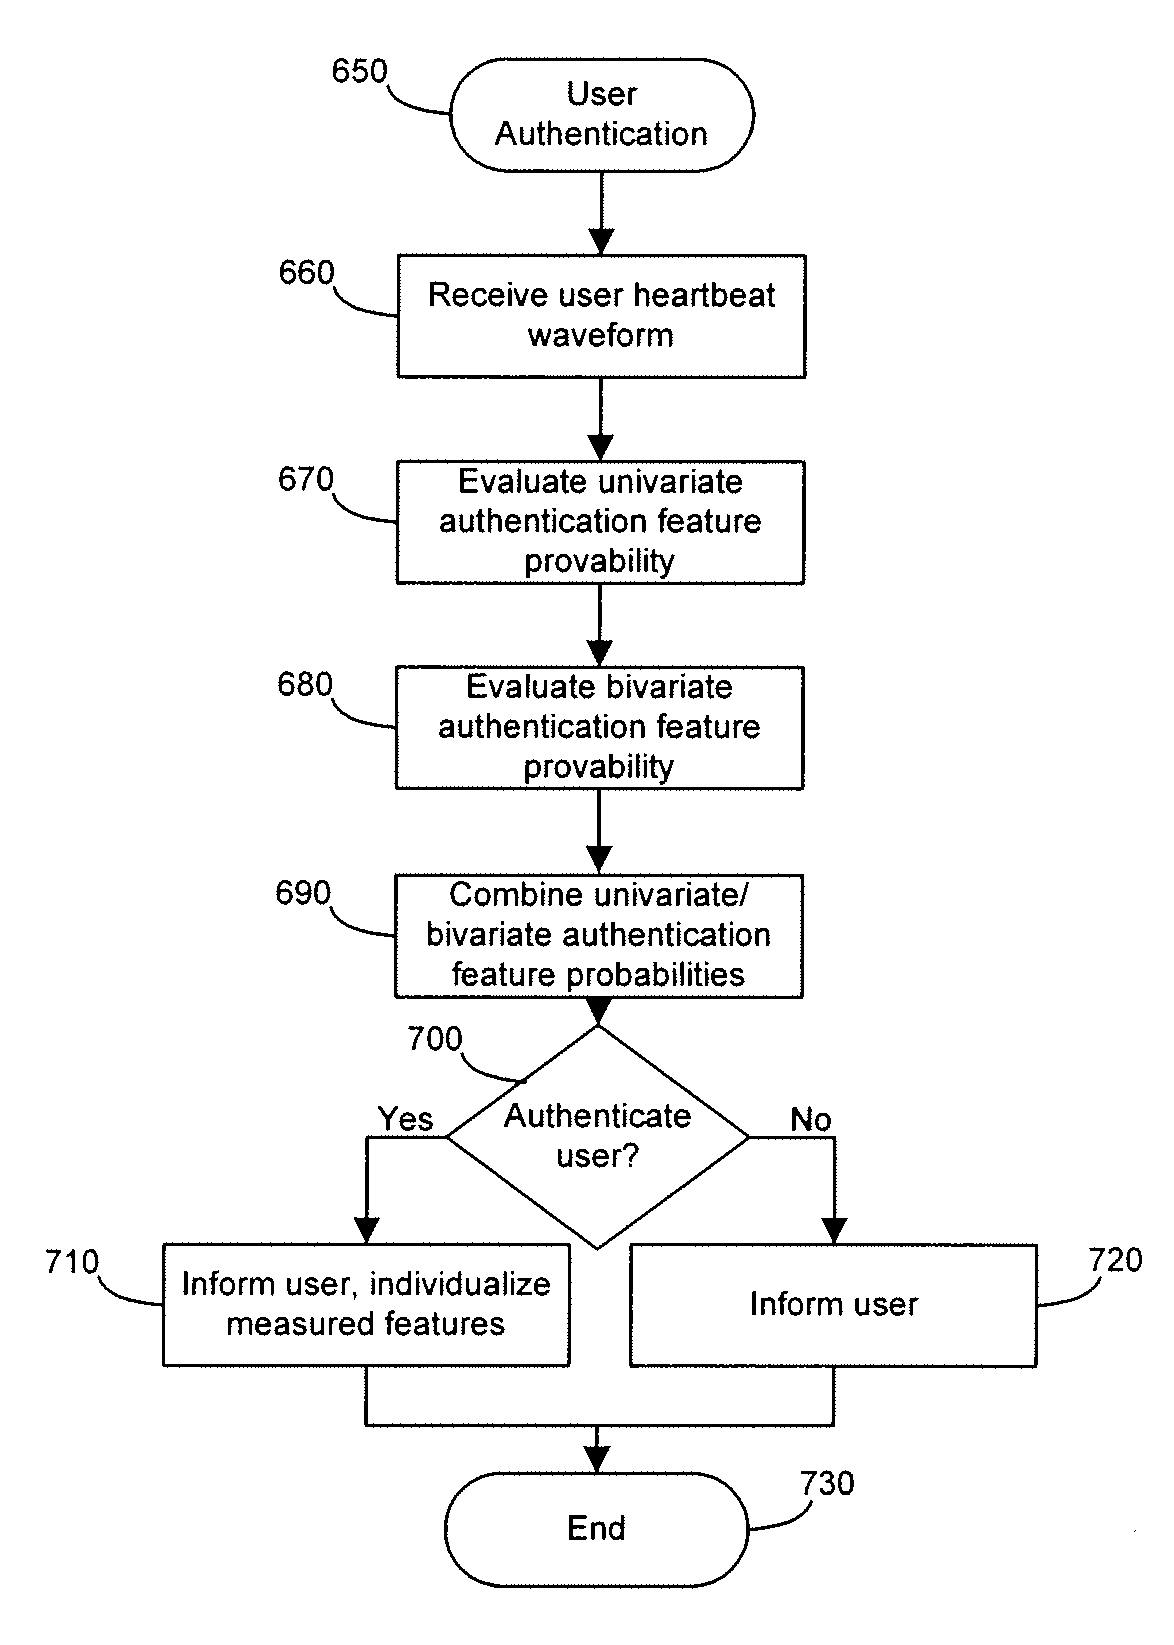 Method and apparatus for characterizing and estimating the parameters of histological and physiological biometric markers for authentication